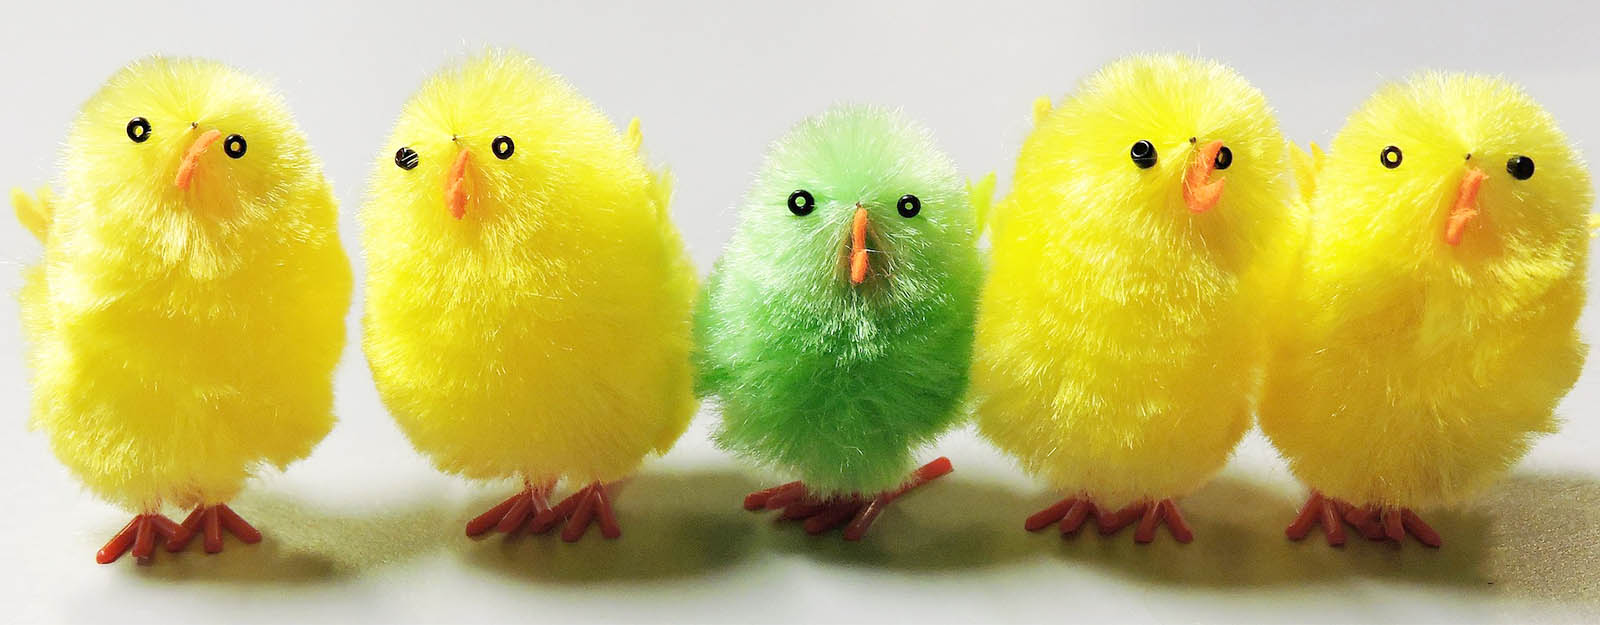 Row of five decorative chicks. Center chick is colored green while the rest are yellow.